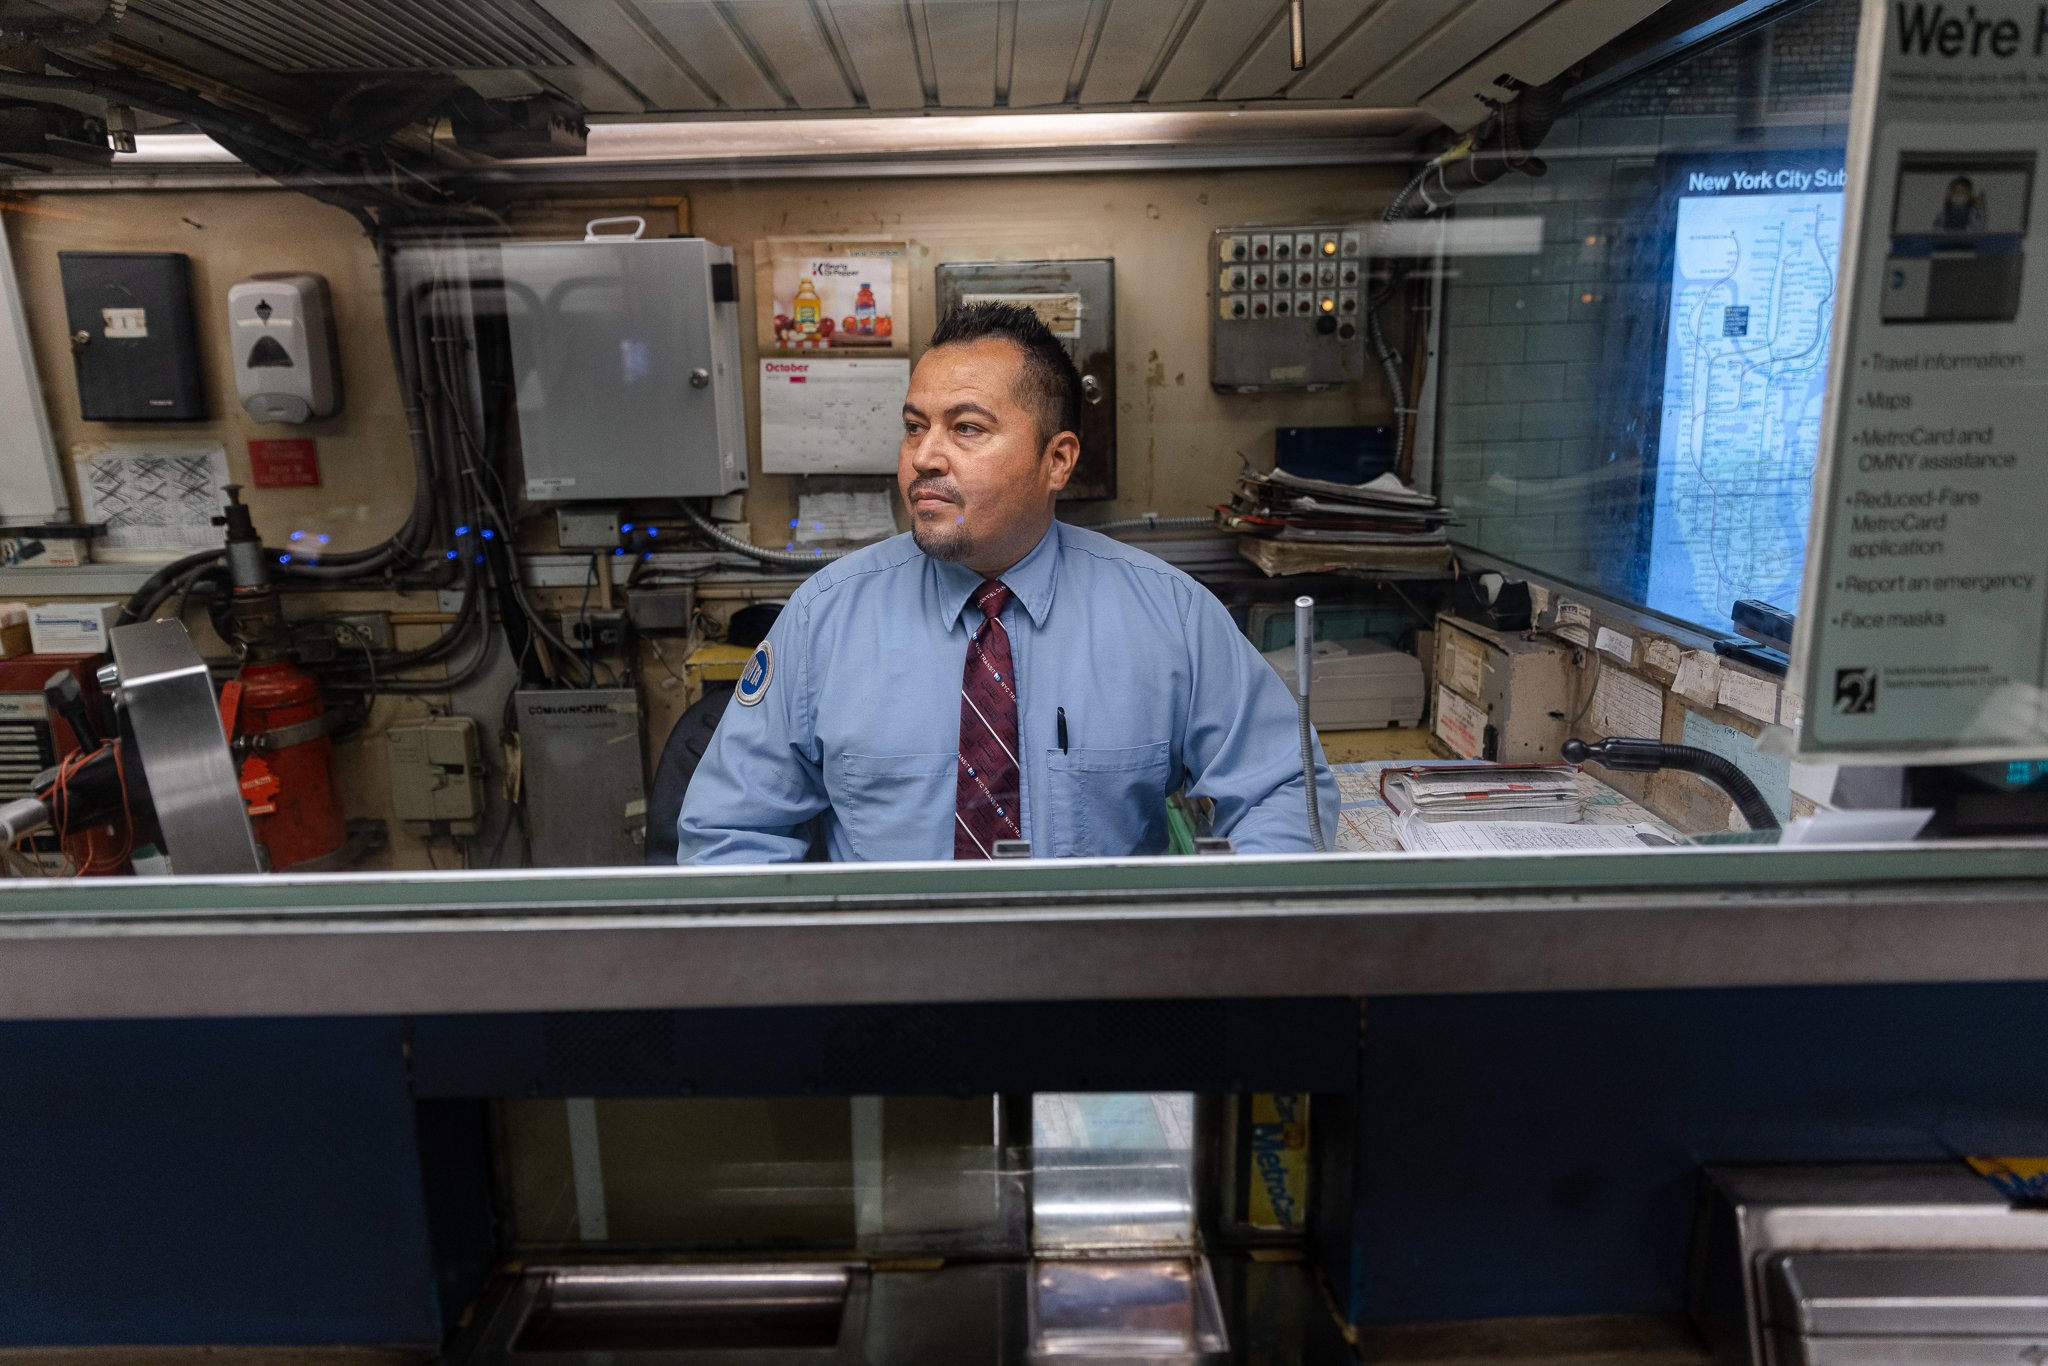  Alfredo Sanchez, an MTA station agent of Woodhaven Queens, for The New York Times.  